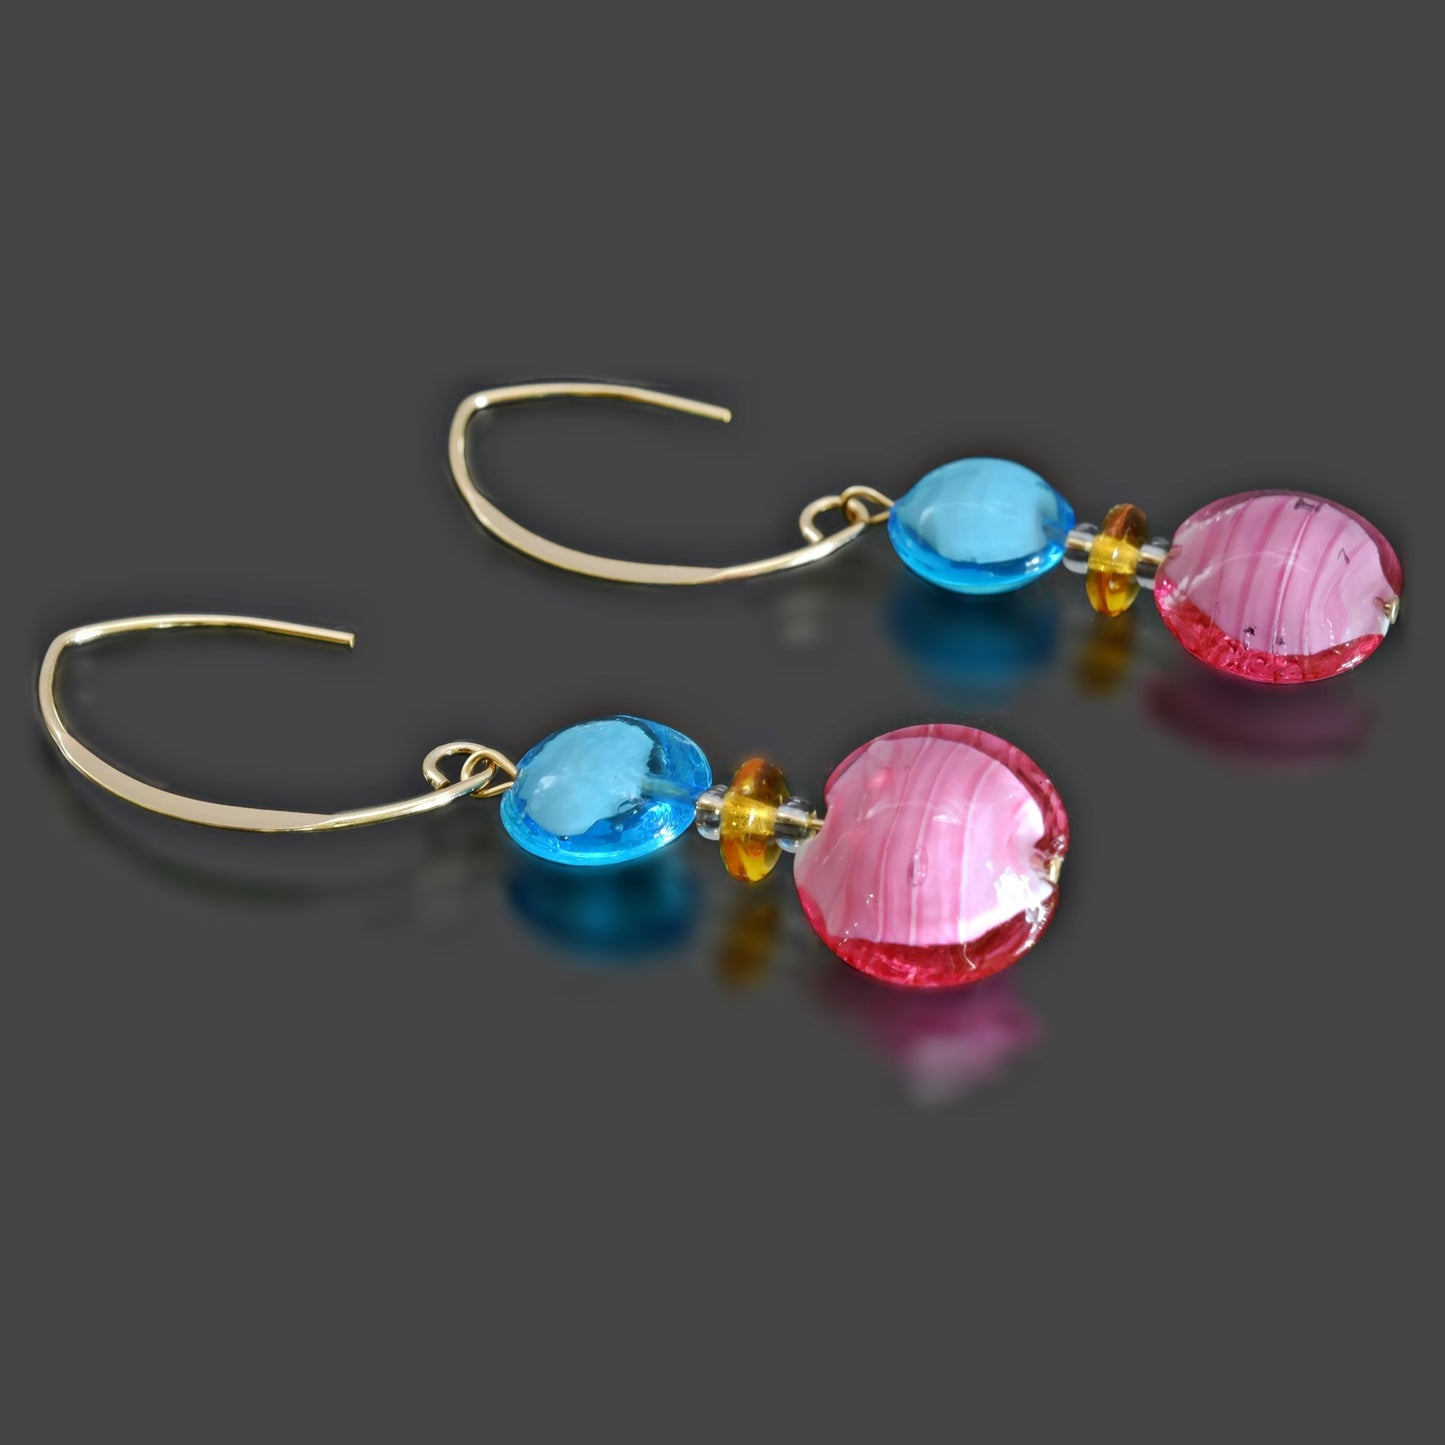 Blue & Pink Murano Glass Earrings on Gold-Filled Earwire Gold Filled 